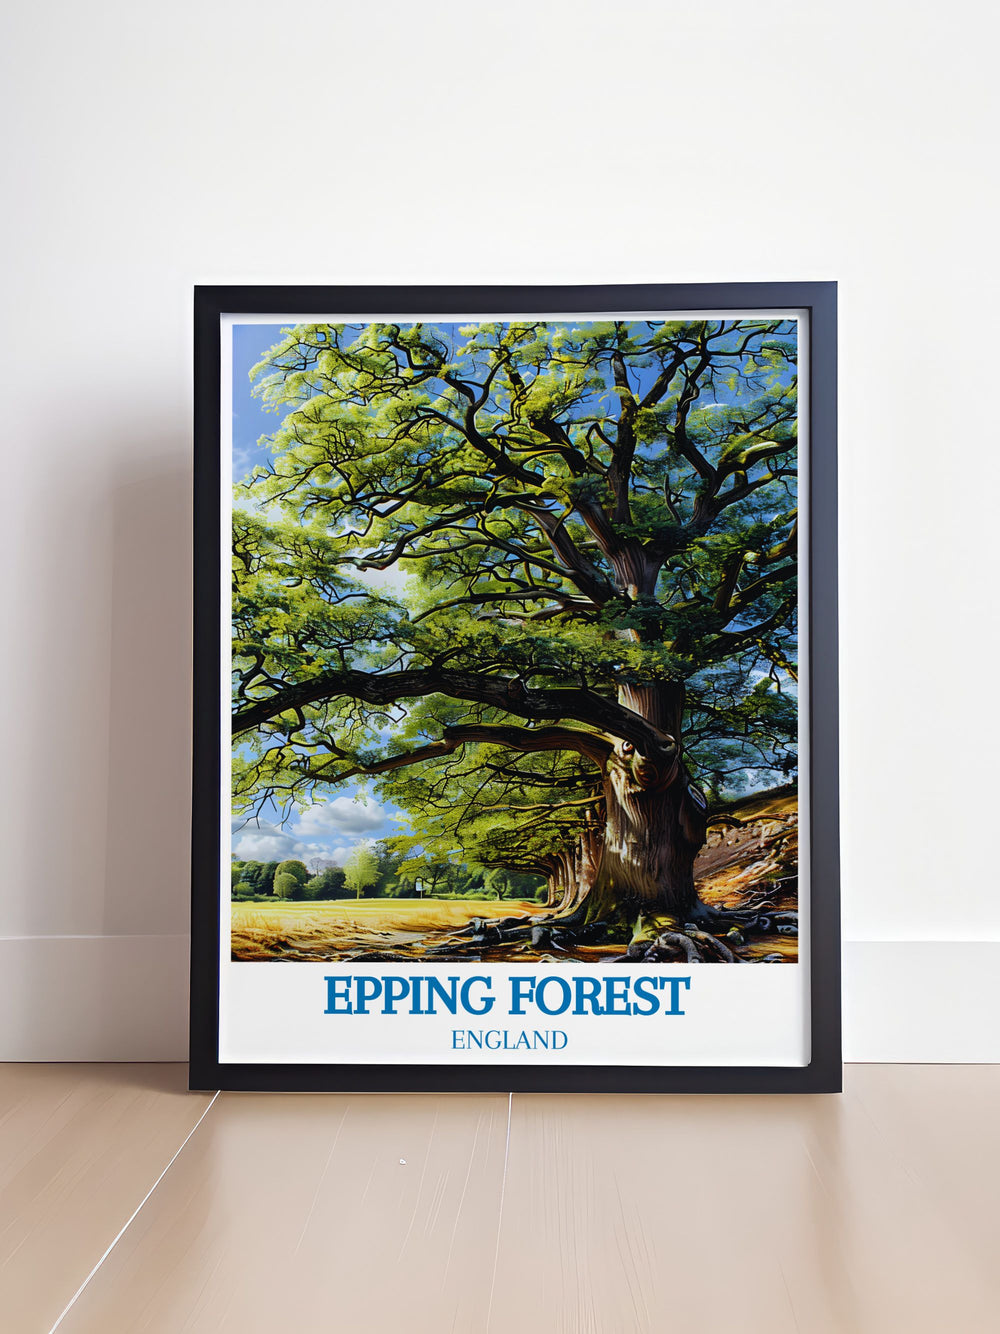 Gallery wall art featuring the ancient oaks of Epping Forest, providing a picturesque view of Londons historic woodland.